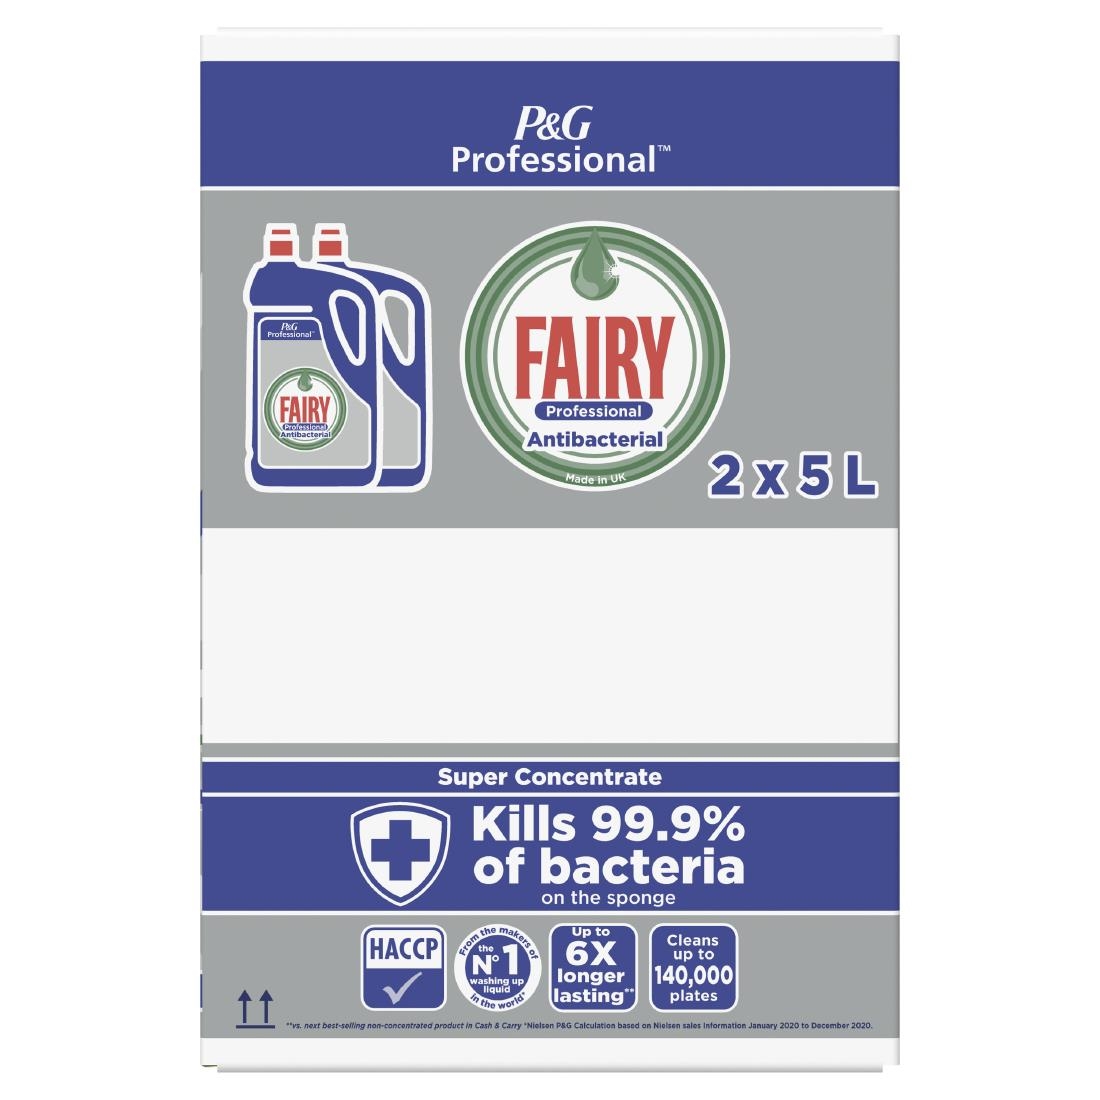 Fairy Professional Super Concentrated Washing Up Liquid Antibacterial 5Ltr Pack of 2 (DX557)